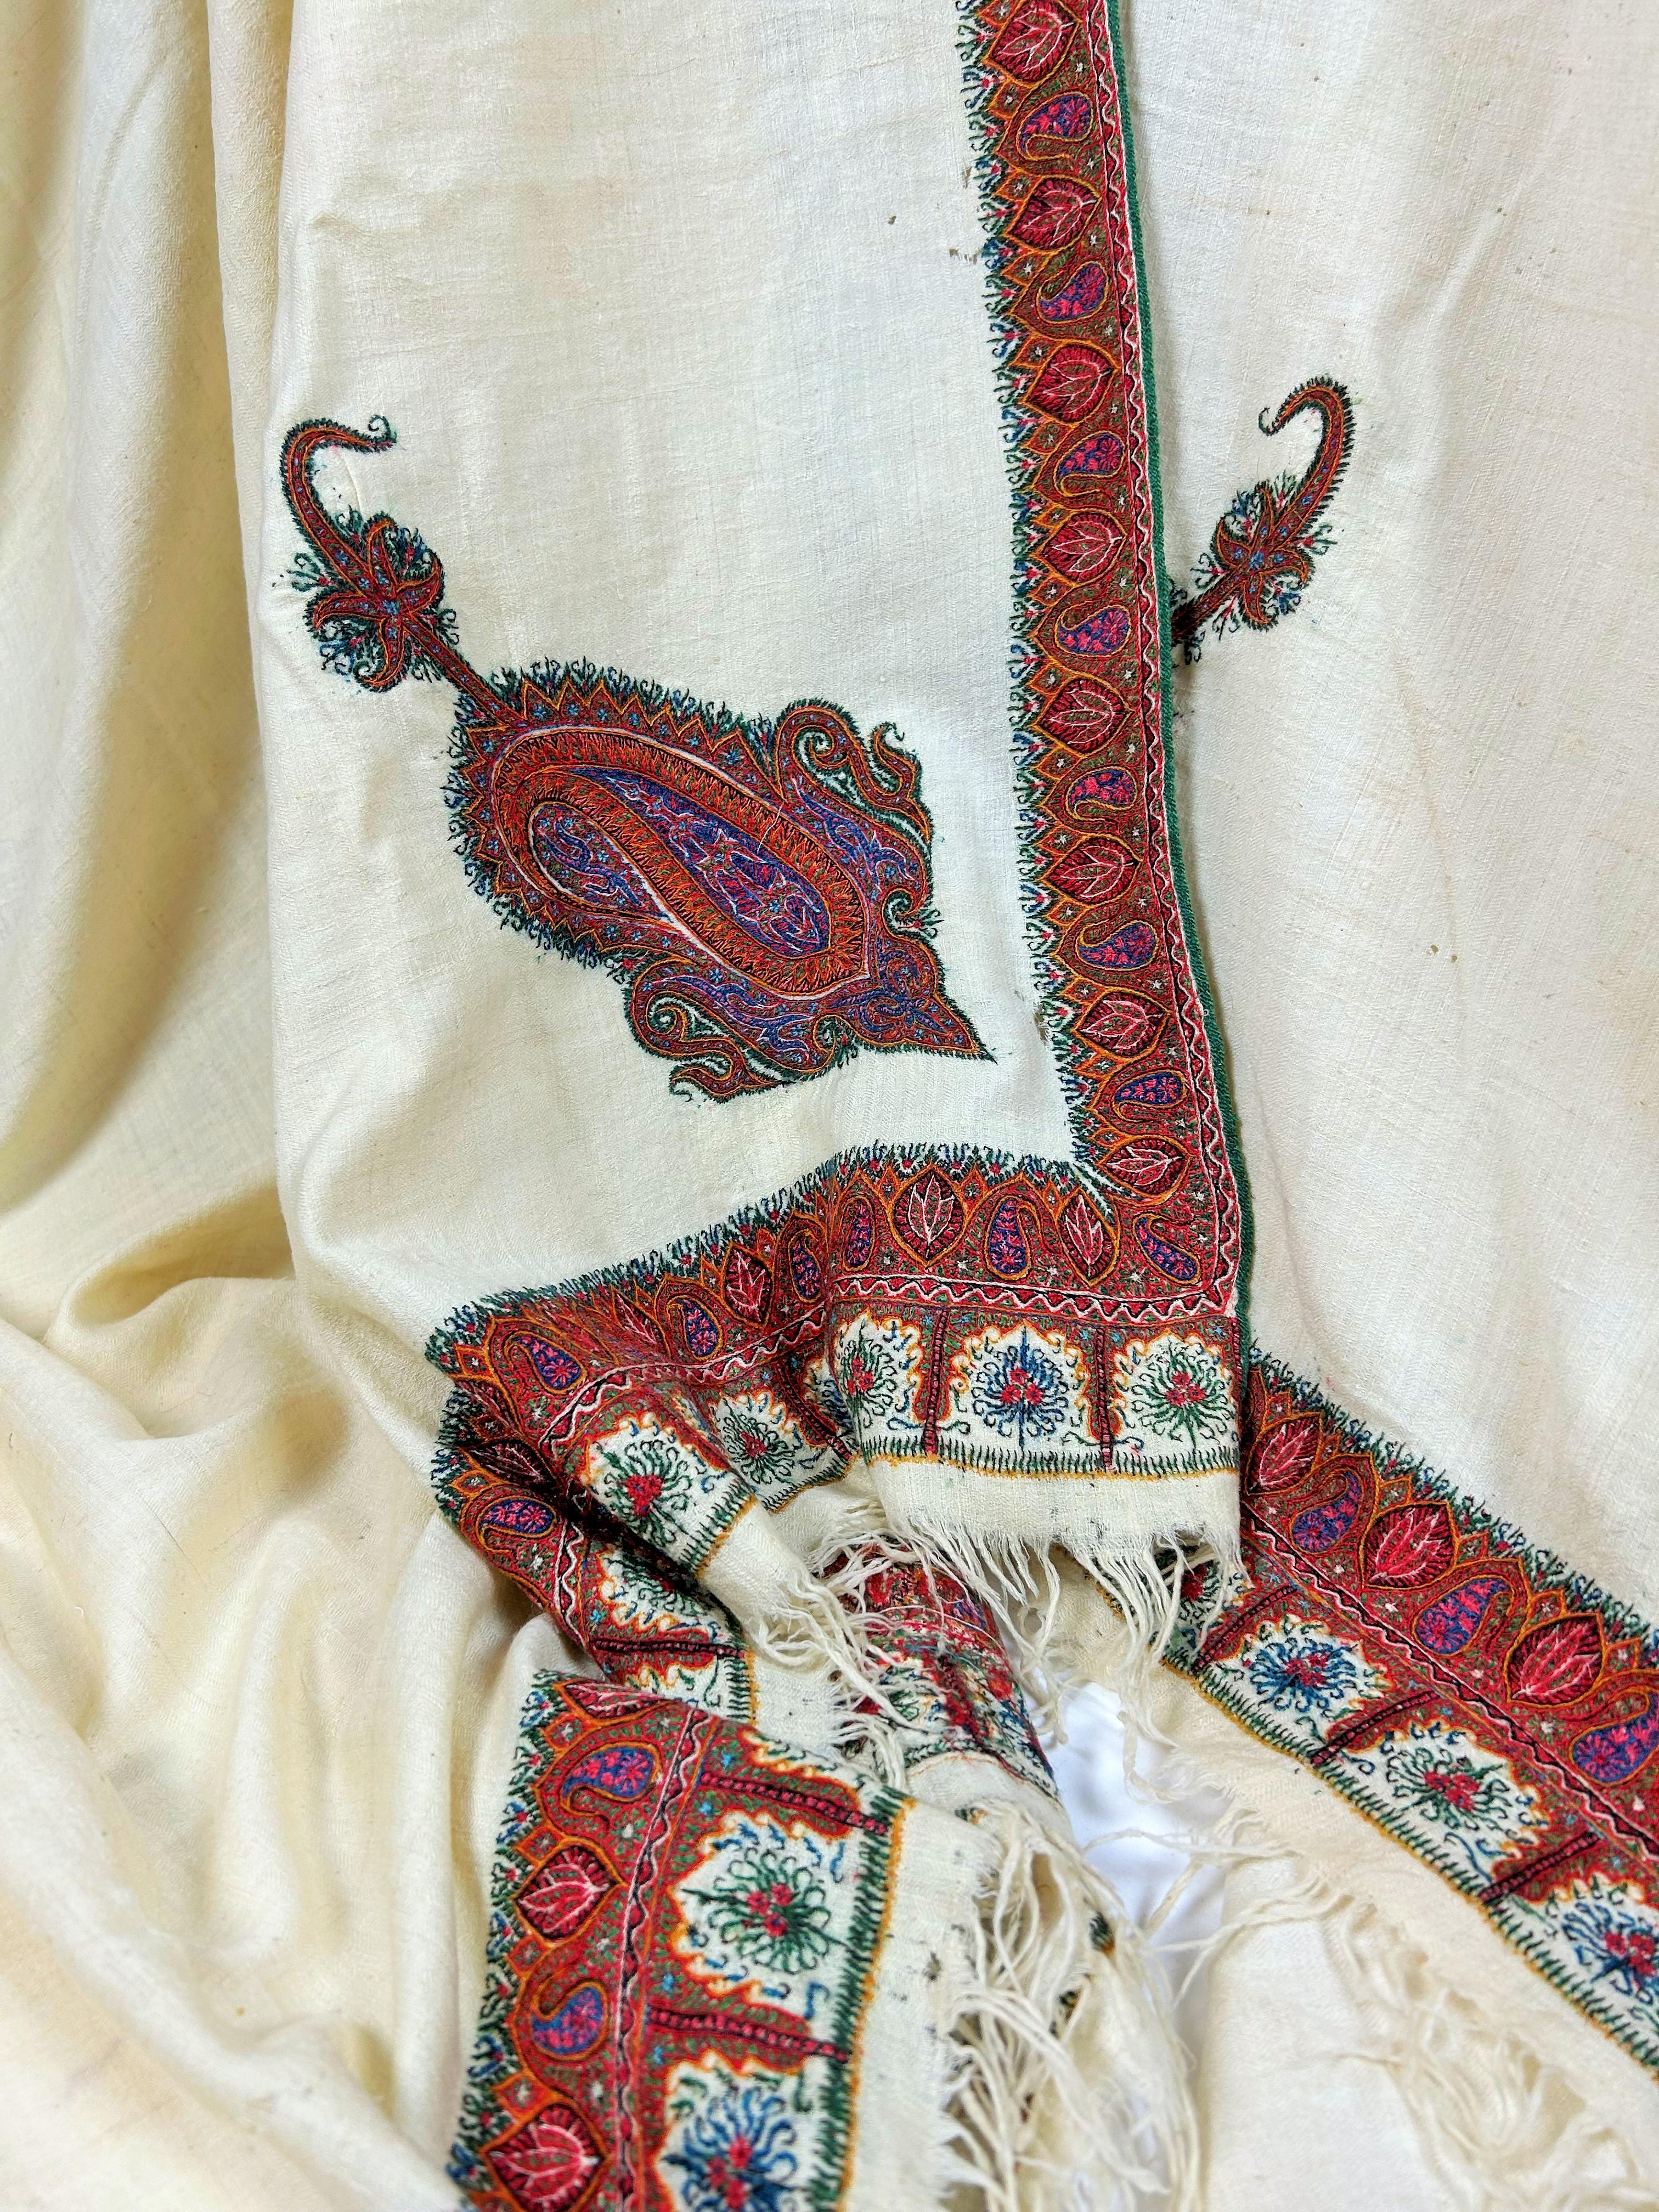 Circa 1880
India for the domestic market or Persia

Very long embroidered shawl on a cream pashmina background known as Amlikar. Large reserve of very fine Tibetan goat's down, very tightly woven in herringbone twill. Framed by fine polychrome wool